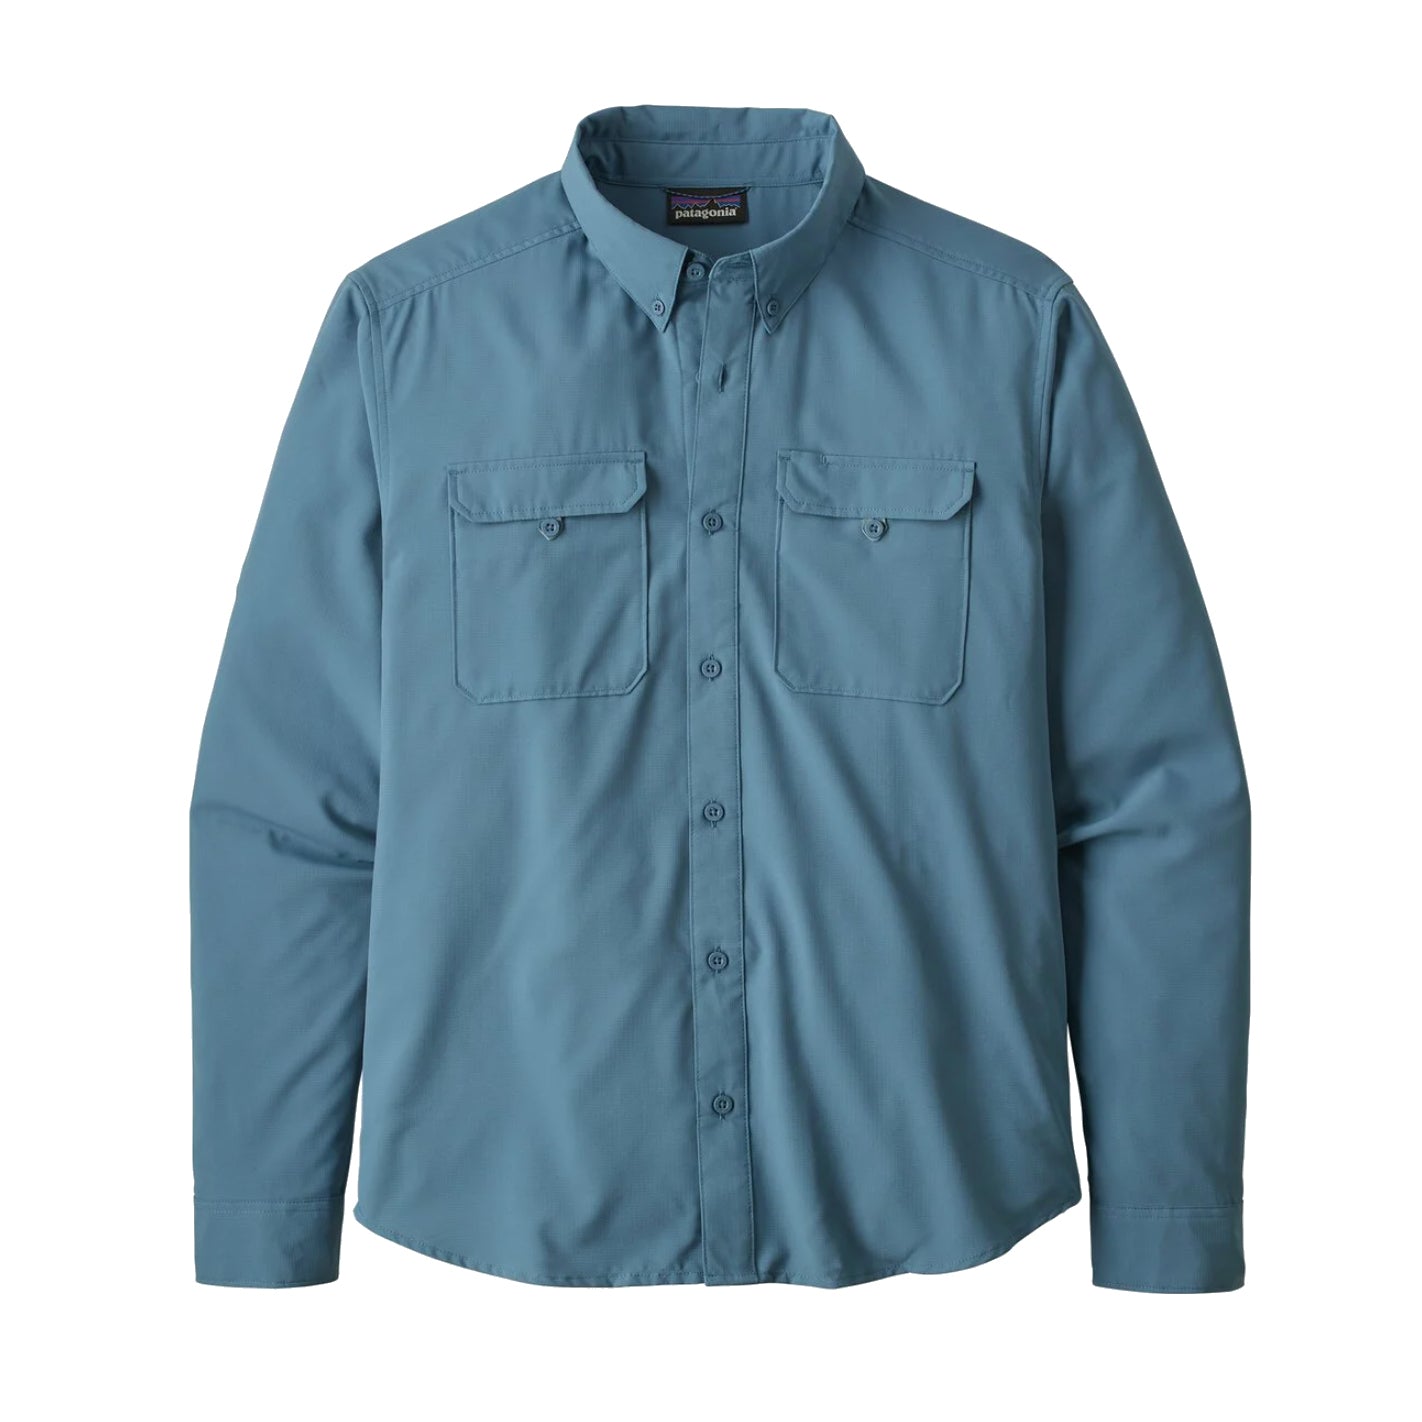 patagonia men's long sleeved self guided hiking shirt in pigeon blue